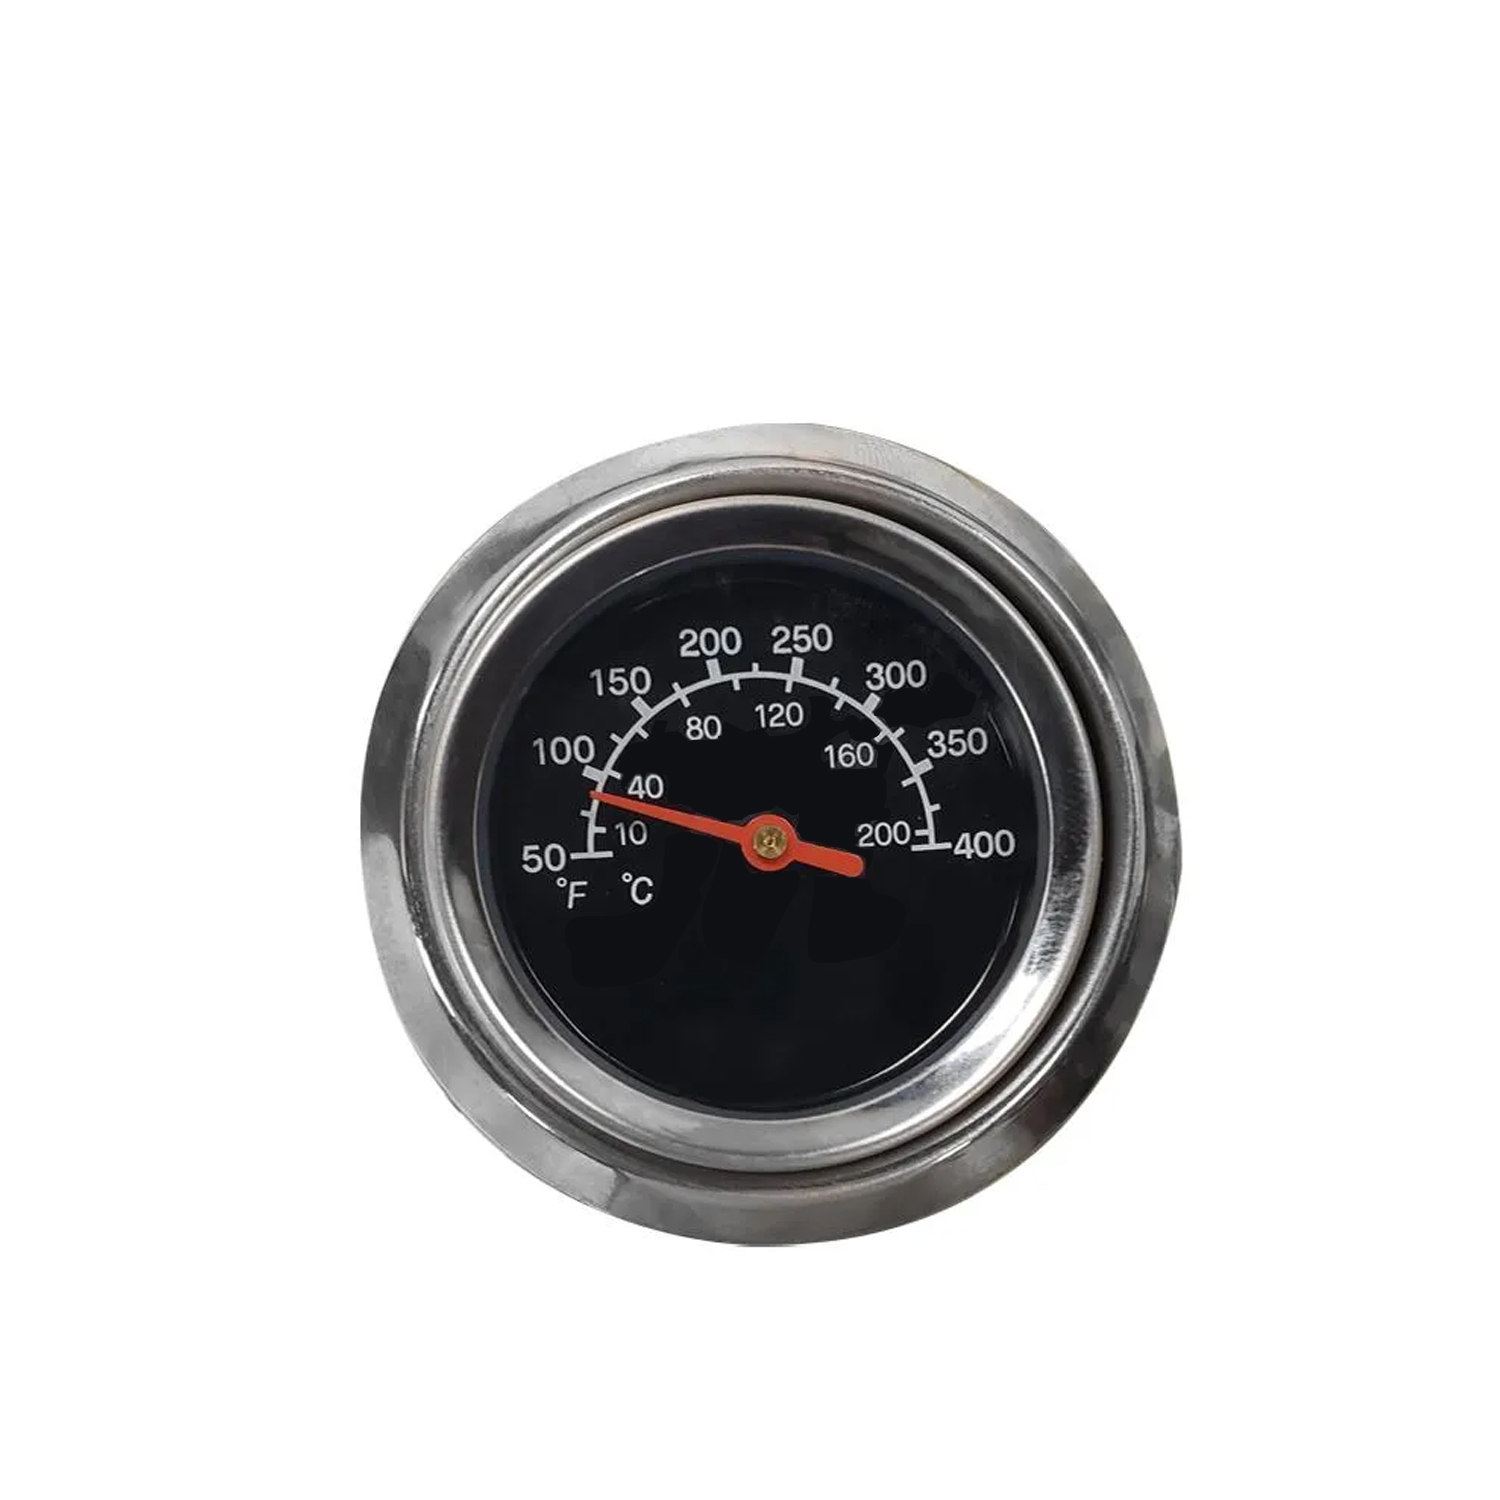 Temperature Gauge Kit Replacement for Masterbuilt Electric Smokers-YAOAWE